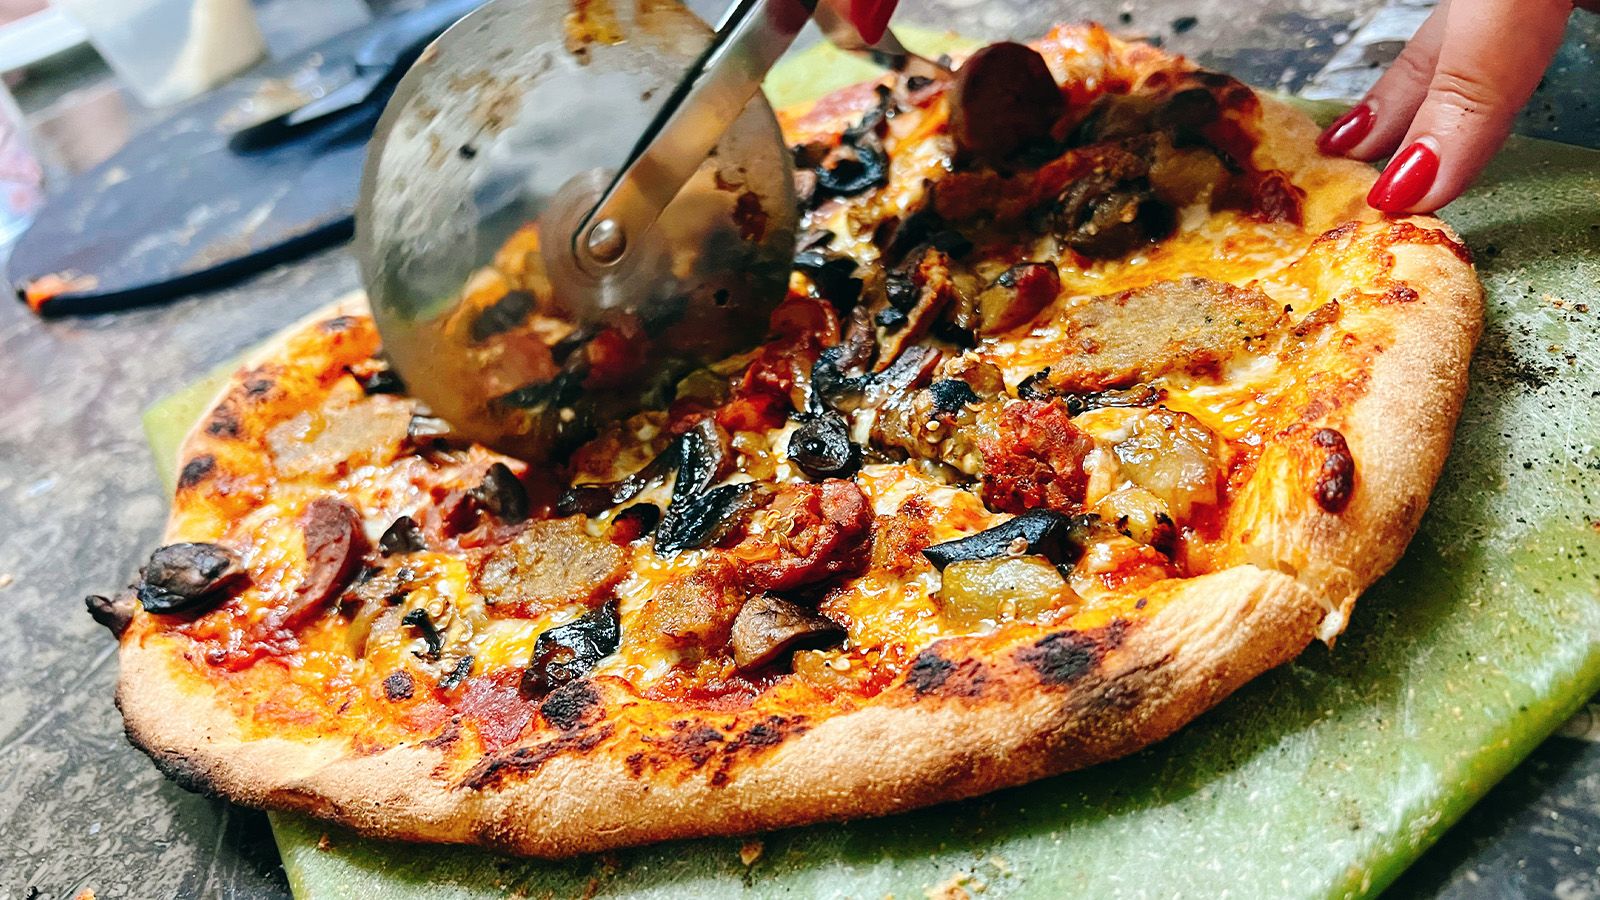 The 6 Best Pizza Ovens